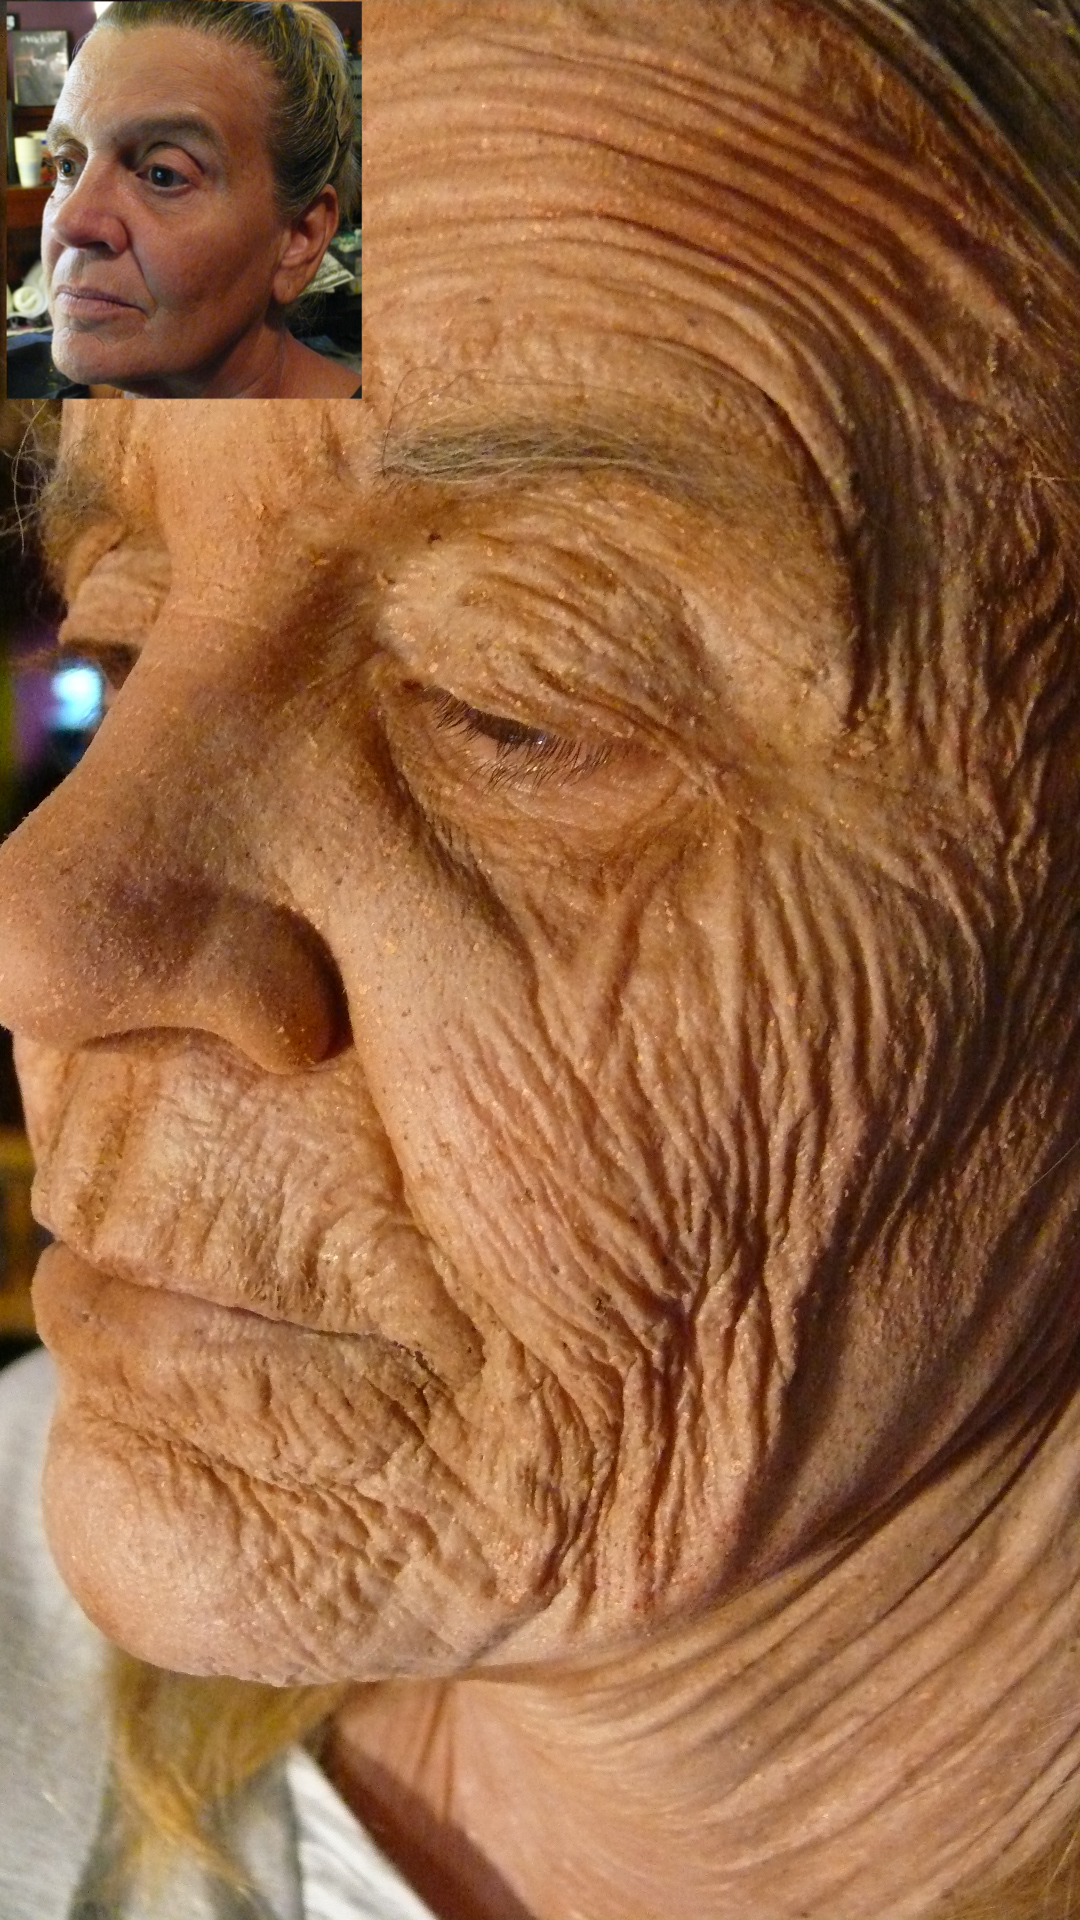 Monster Makeup FX Extreme Old Age Special Effects Makeup.JPG